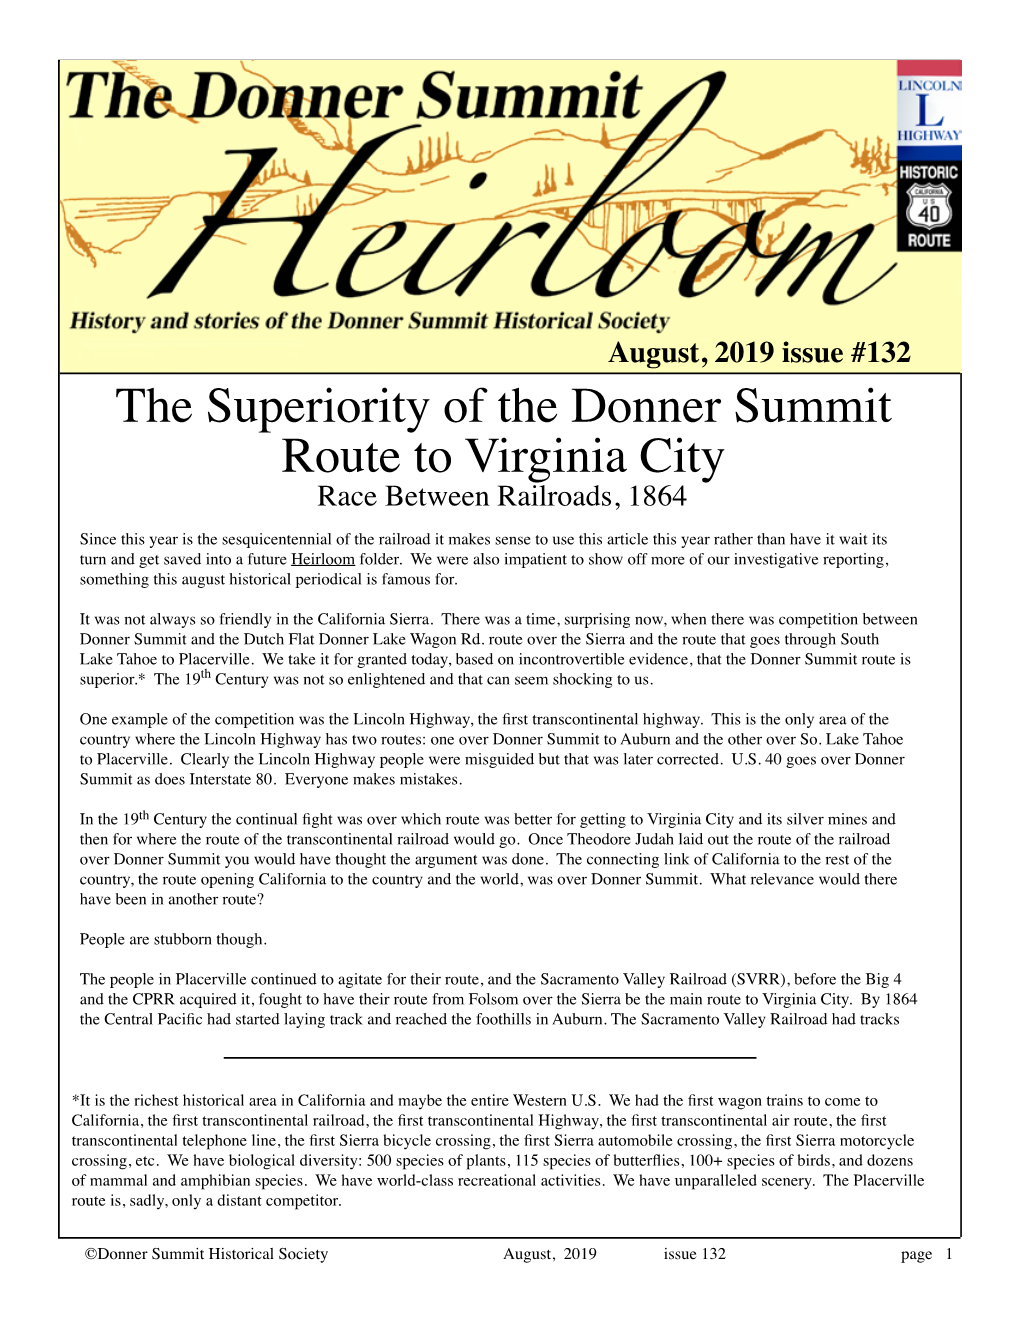 The Superiority of the Donner Summit Route to Virginia City